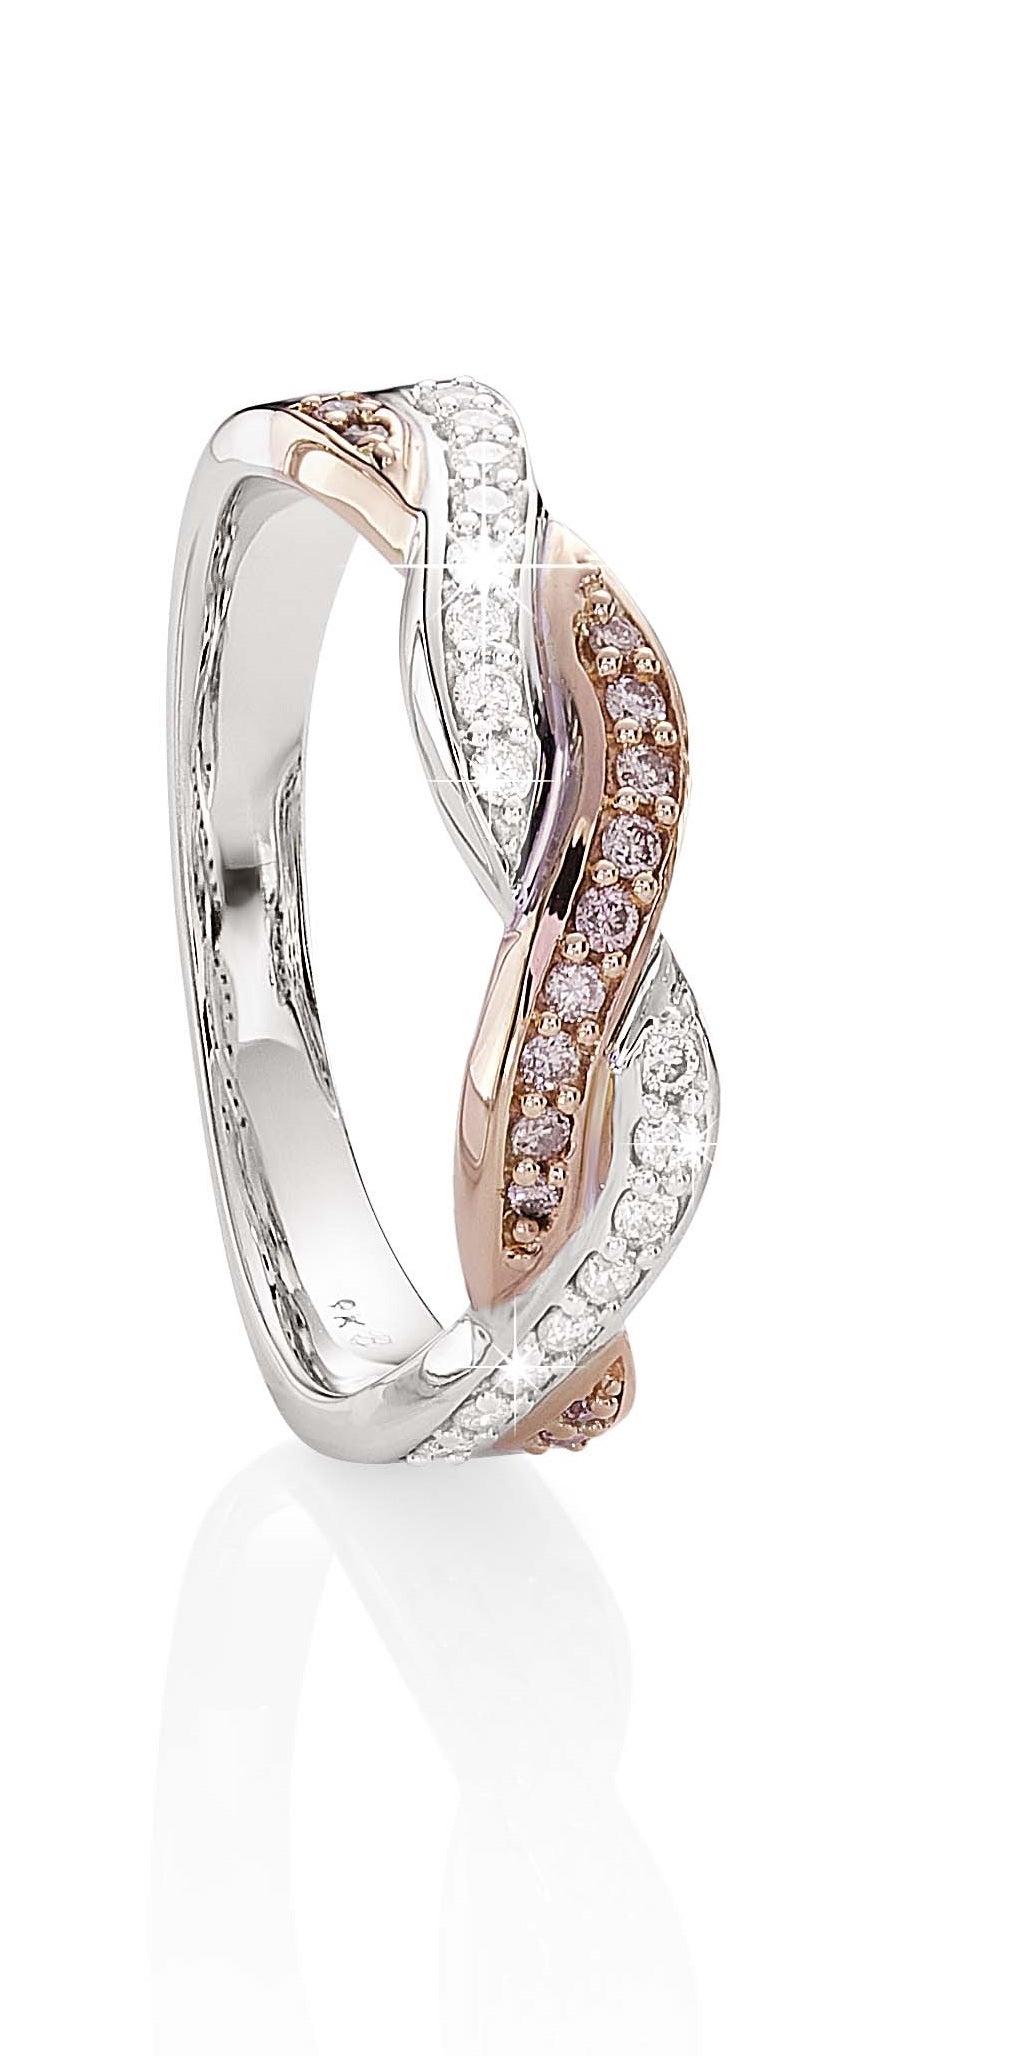 MP3514 ARGYLE PINK - 9ct WG/RG 0.25ct natural pink and white diamond crossover ring HI P1/2 + natural pinks